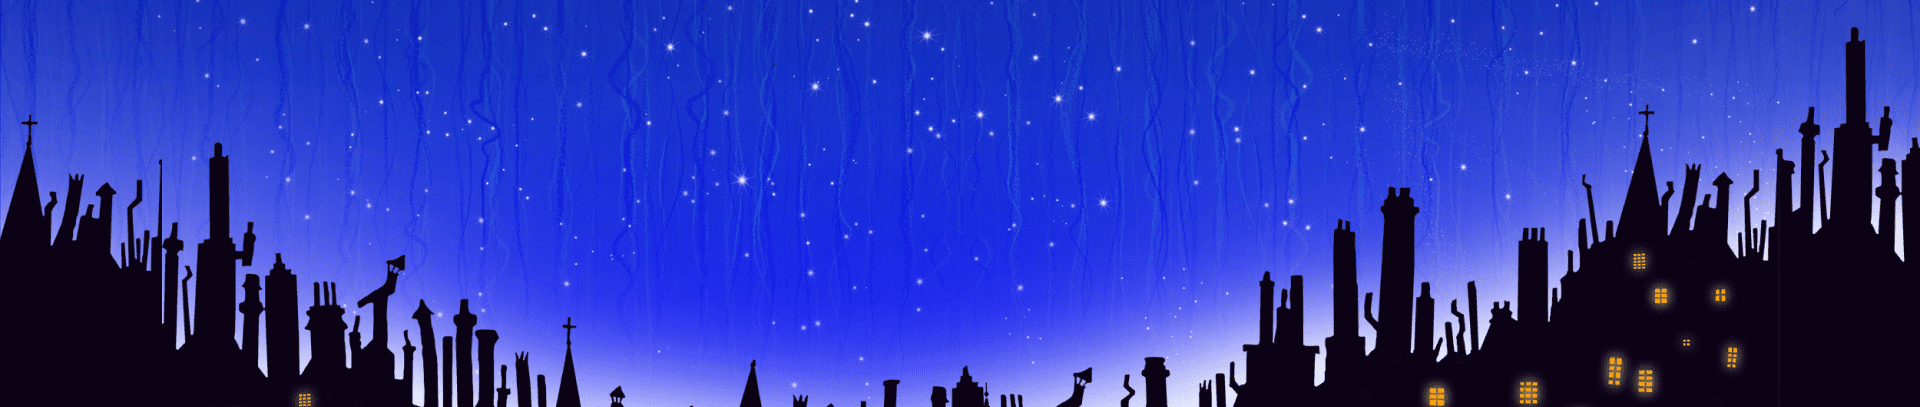 Background image of a blue, star-filled night sky with roof tops and chimneys in the foreground